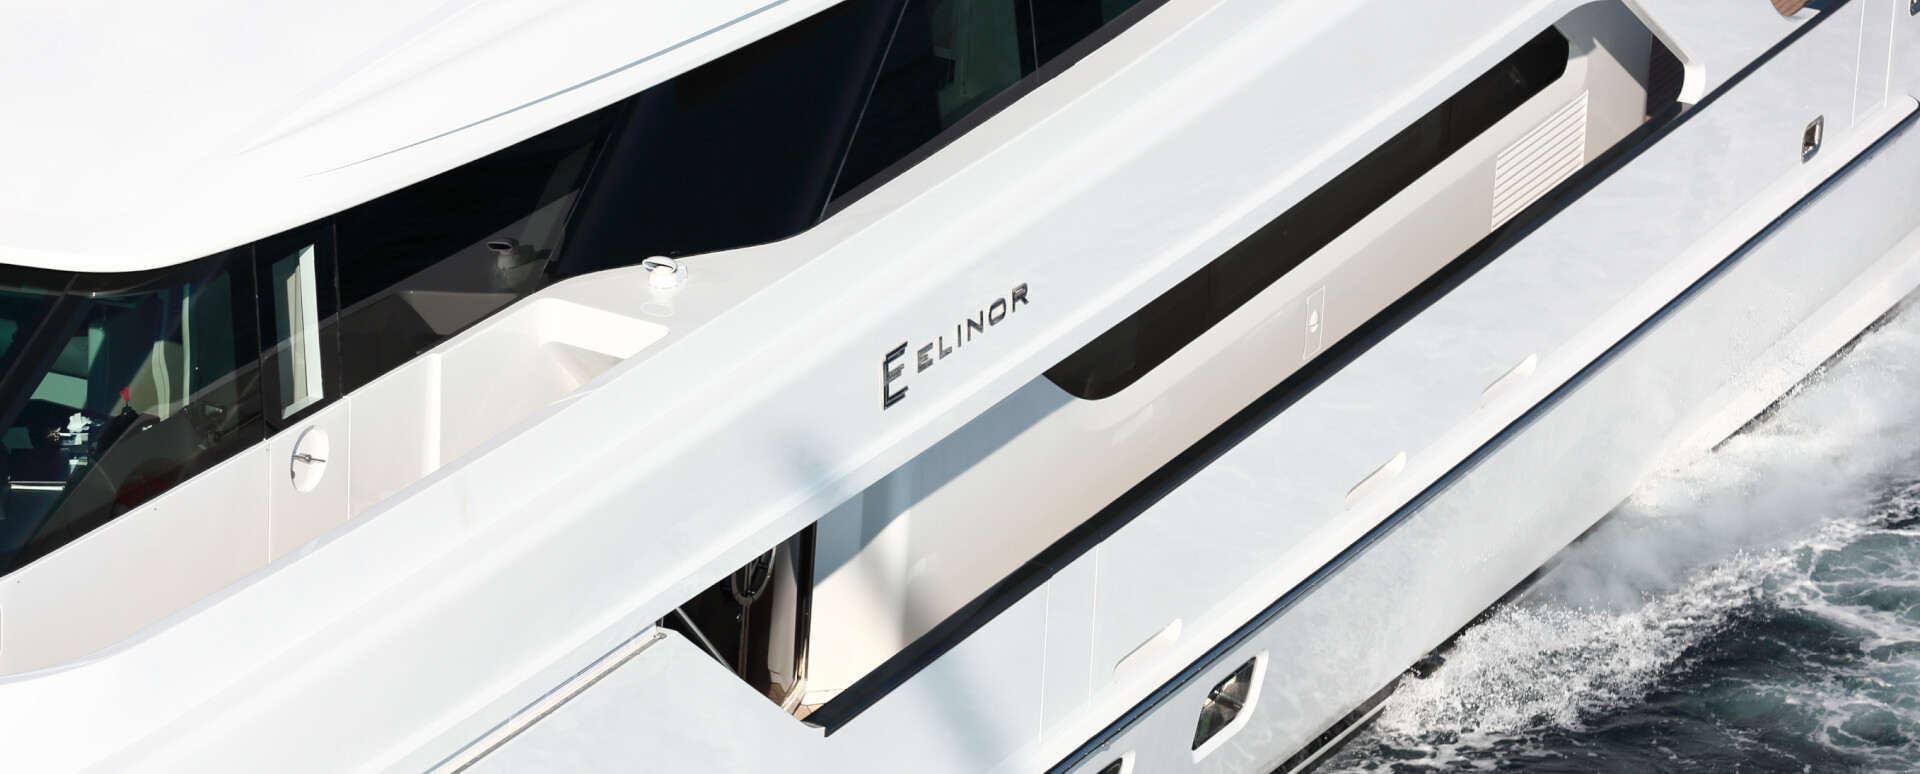                                                                                                     ELINOR Available for Viewings @ Cluster Yachting Monaco Spring Pop Up event, May 14th 2019
                                                                                            